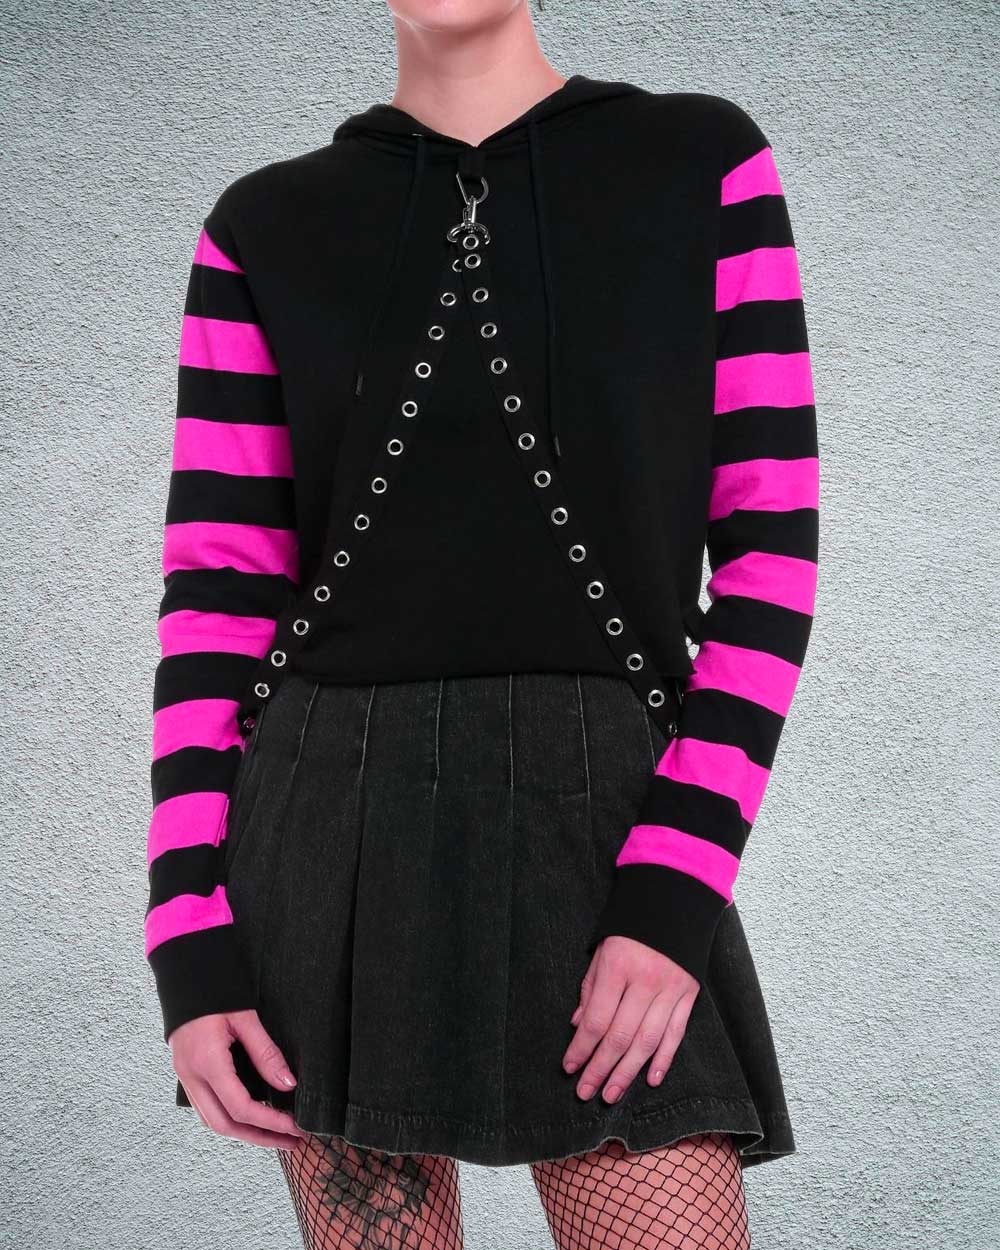 Soft emo outfits with pink stripe top